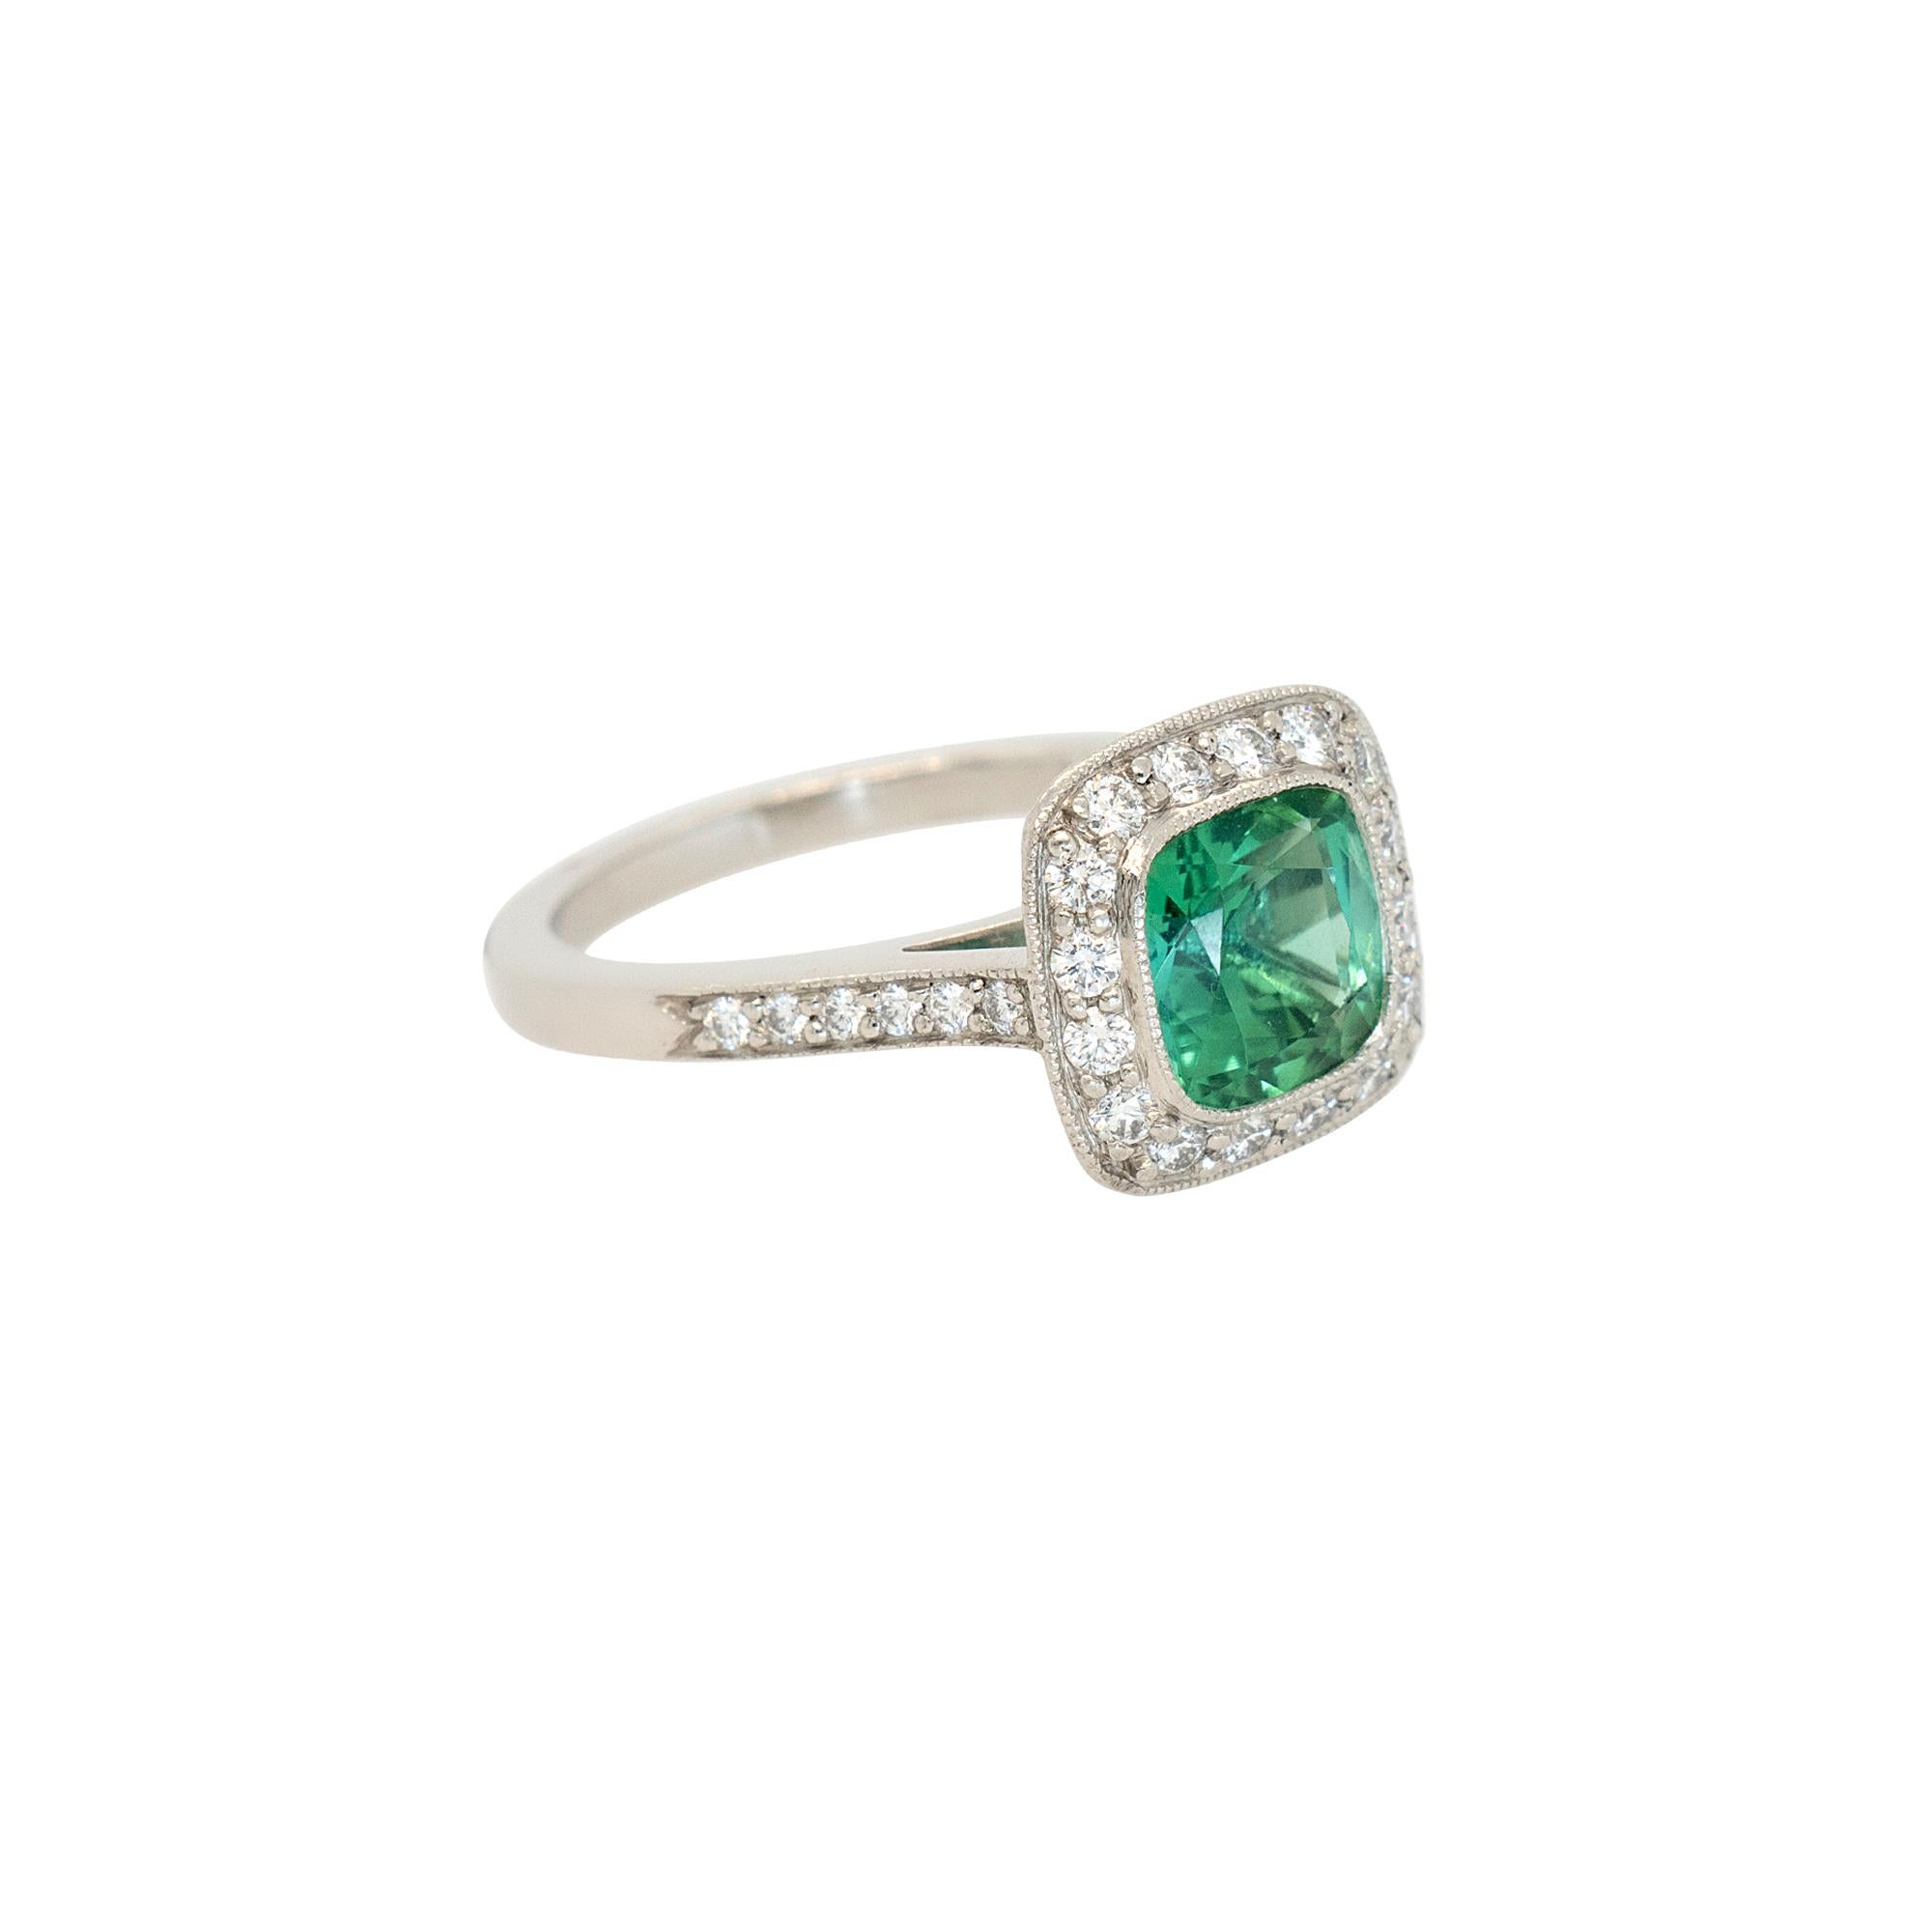 Center Details: Green Gemstone
Ring Material: Platinum 0.38ctw Diamond Halo Ring Size: 6 (can be sized)
Total Weight: 7.2g (4.6dwt)
This item comes with a presentation box!
SKU: R5960

Experience the pinnacle of luxury with this Tiffany & Co.